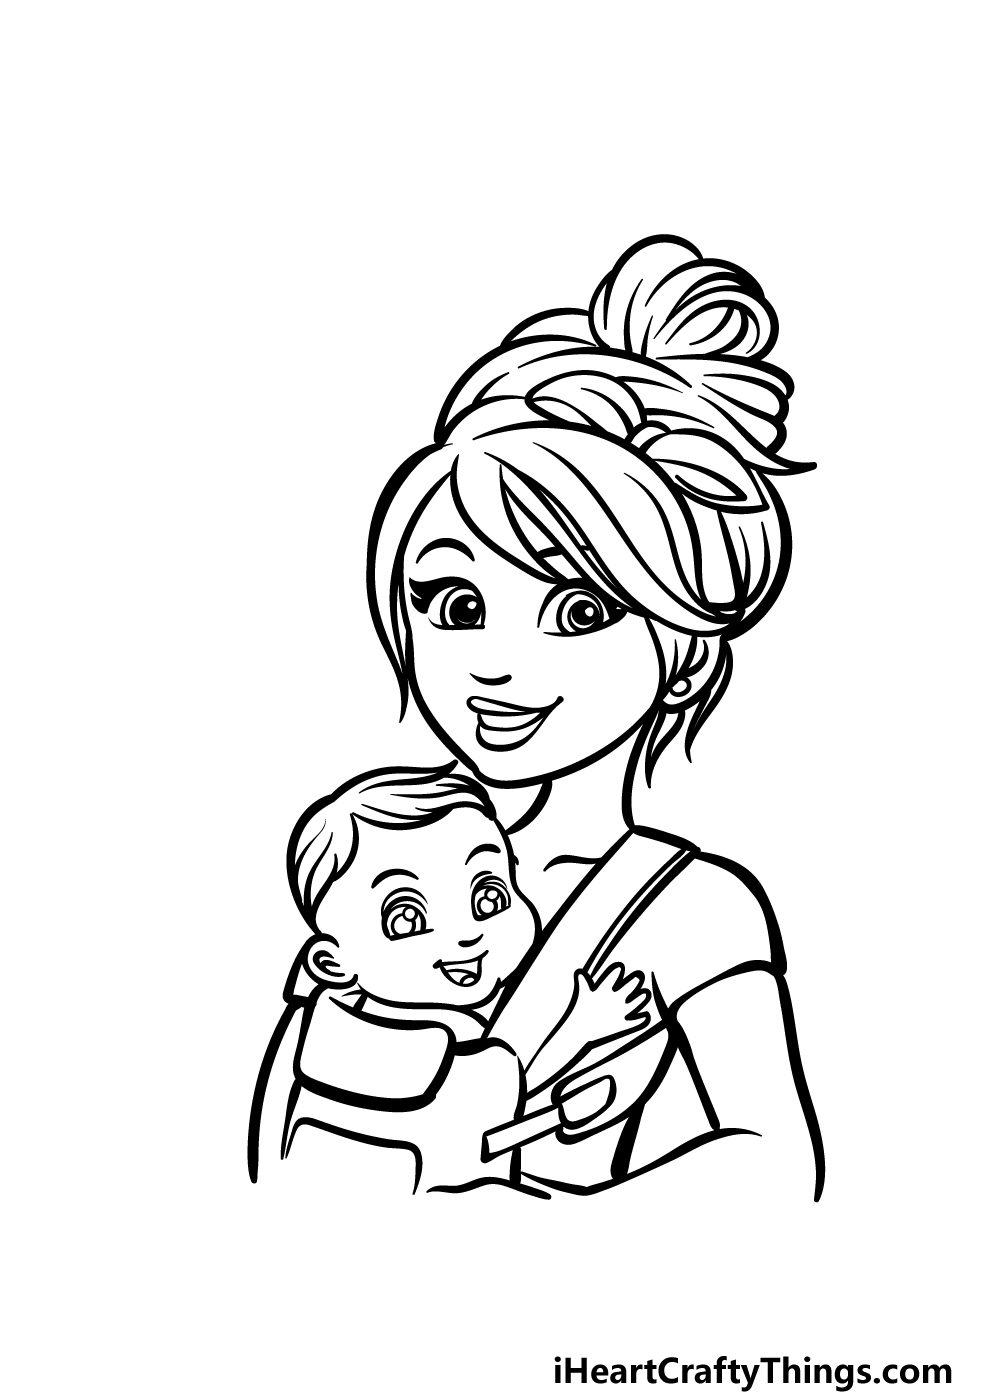 How to Draw a Mother Hugging a Daughter - Really Easy Drawing Tutorial-hanic.com.vn